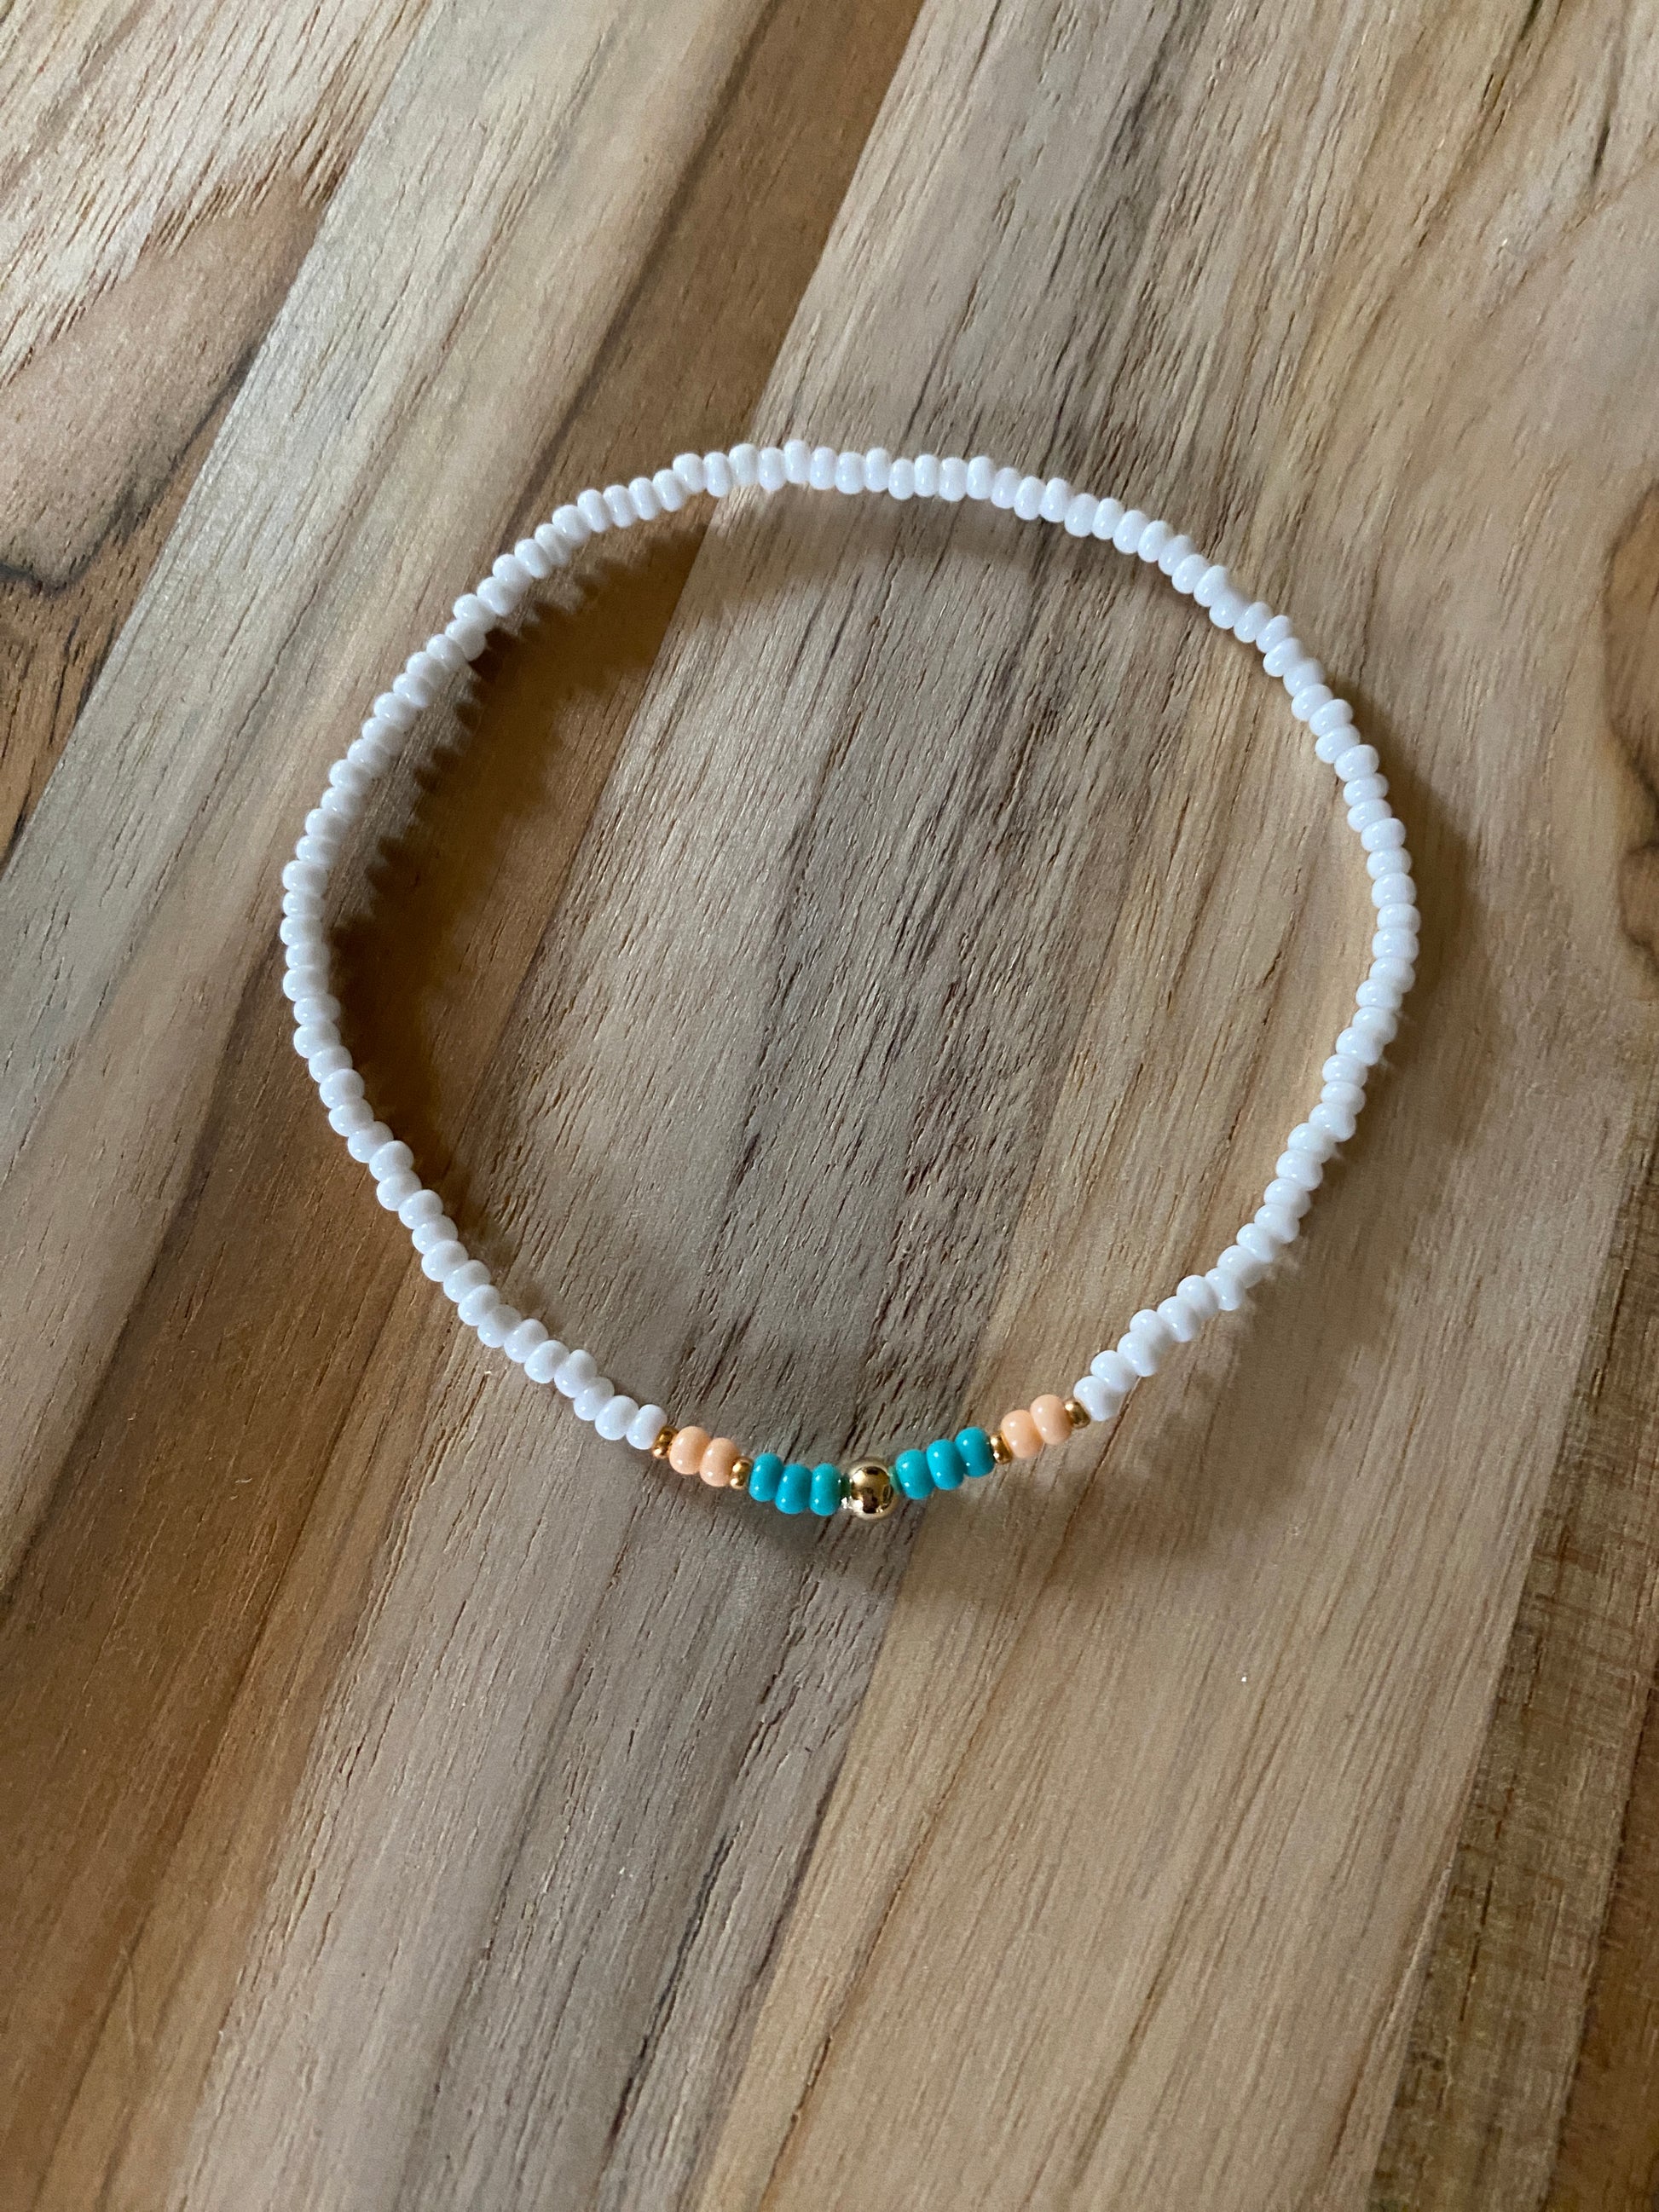 Beach Vibe Dainty White Seed Bead Ankle Anklet with Turquoise and Peach Accents - My Urban Gems